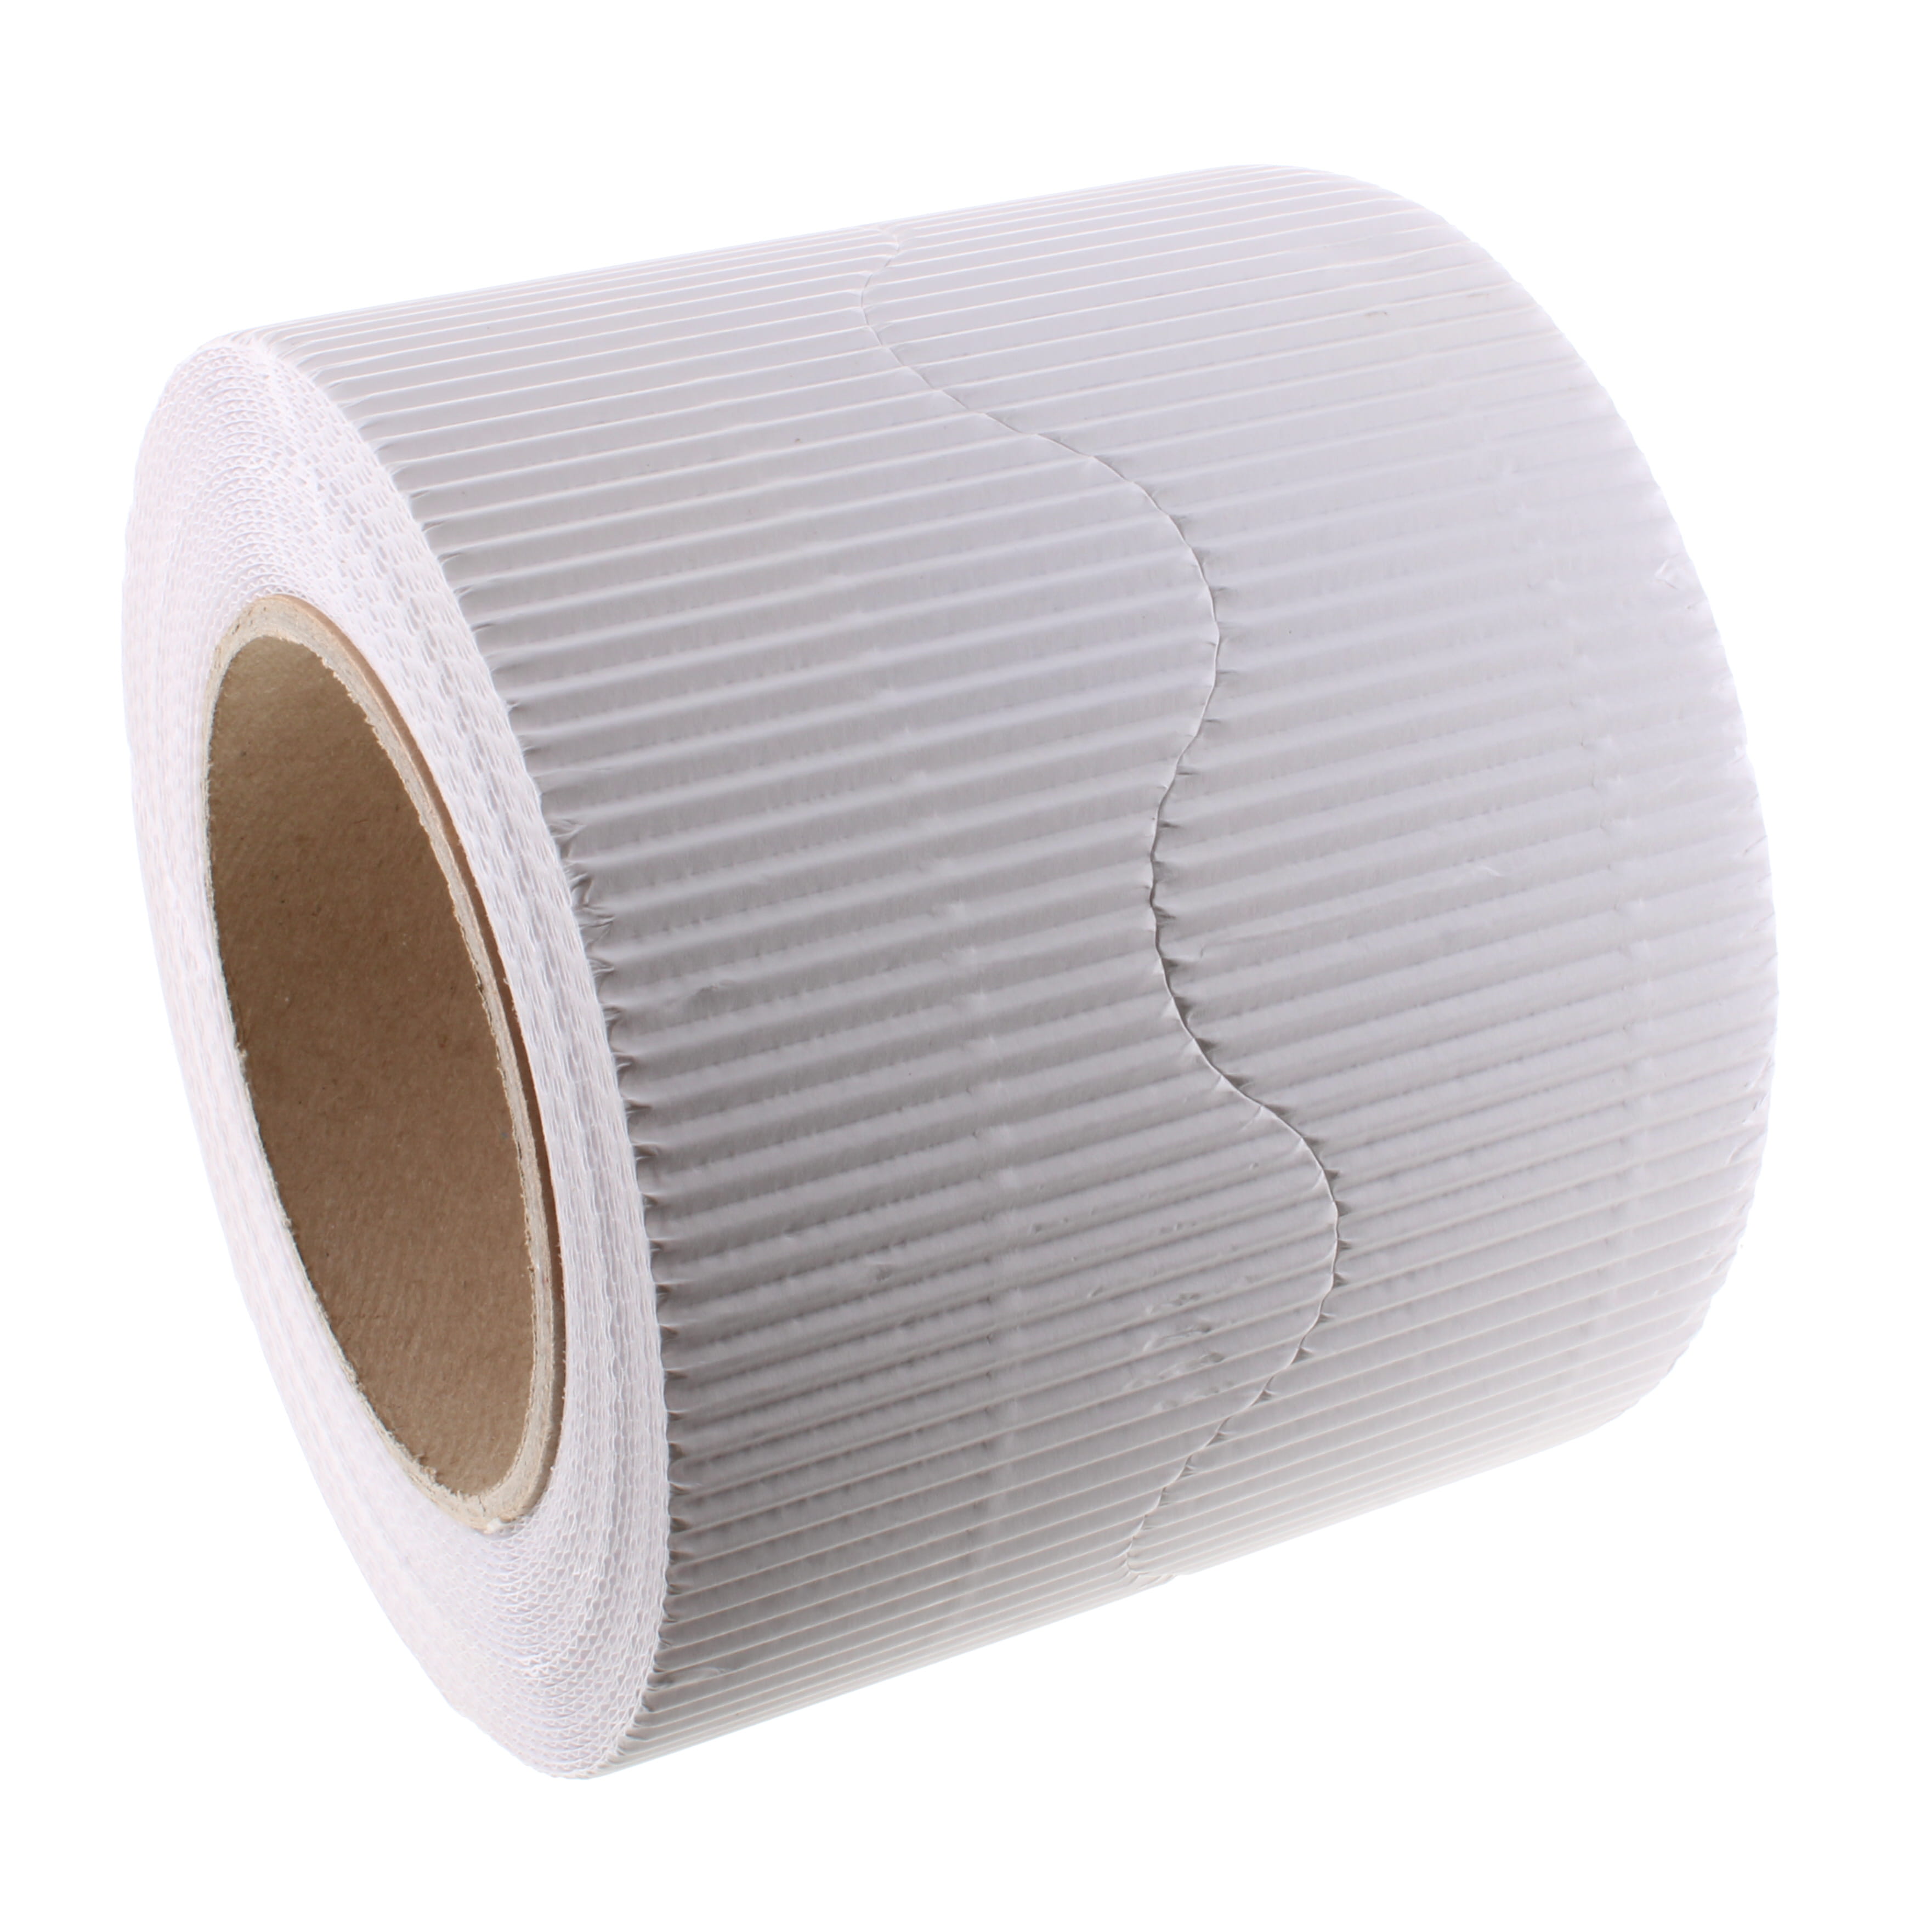 Border Rolls Corrugated Scalloped White 57mm x 7.5m - pack of 2